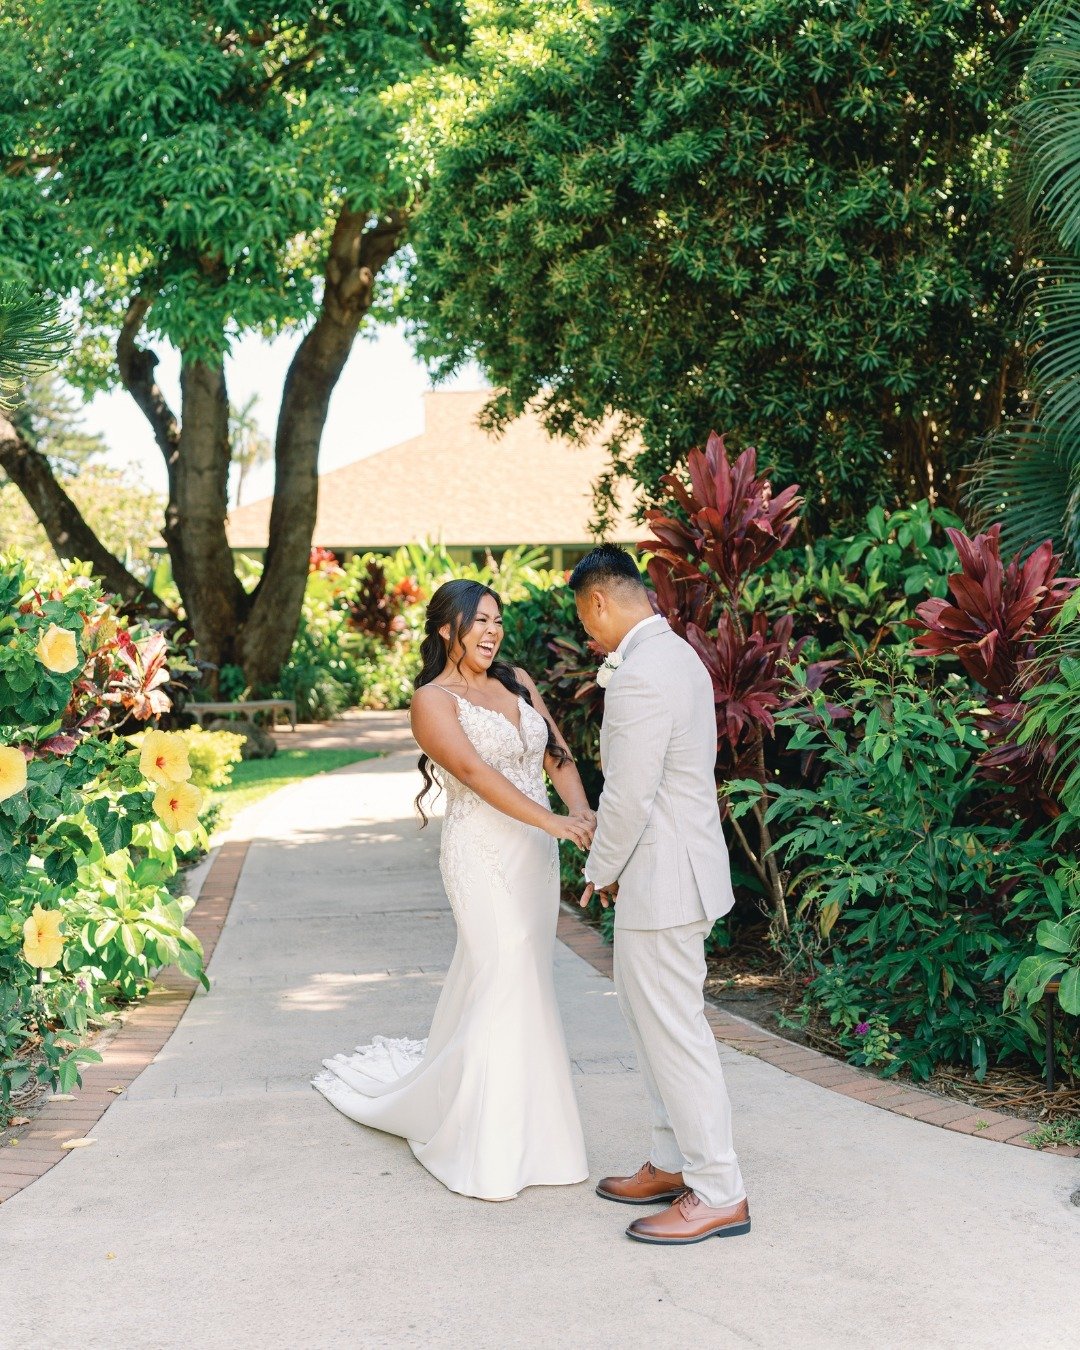 We will never get over first look moments 🤍🥹⁠
⁠
Planning and Design: @opihilove⁠
Photography: @ashleygoodwinphoto ⁠
Videography: @islemedia⁠
Venue: @olowaluplantationhouse ⁠
Florals: @mauipalmtreefloral⁠
HMU: @mauimakeupartistry⁠
Music: @nextlevel8